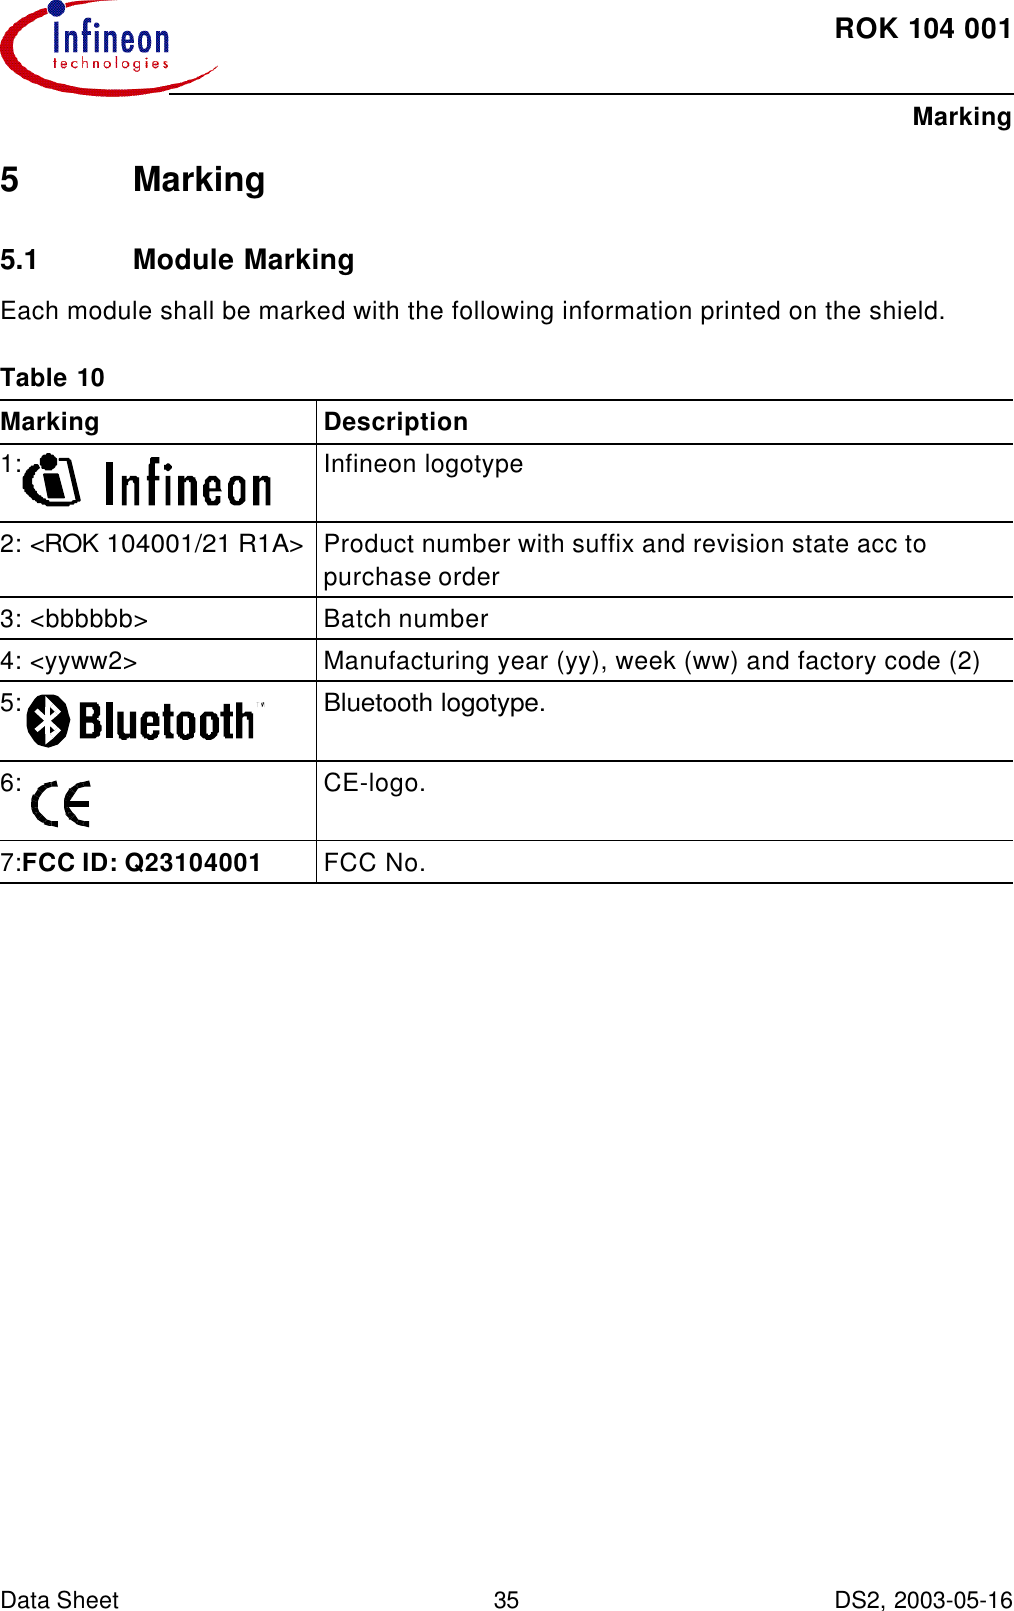 ROK104001Marking Data Sheet 35 DS2, 2003-05-16  5Marking5.1 Module MarkingEach module shall be marked with the following information printed on the shield.Table10Marking Description1: Infineon logotype2: &lt;ROK104001/21 R1A&gt;Product number with suffix and revision state acc to purchase order3: &lt;bbbbbb&gt; Batch number4: &lt;yyww2&gt; Manufacturing year (yy), week (ww) and factory code (2)5:Bluetooth logotype. 6: CE-logo. 7:FCC ID: Q23104001 FCC No. 